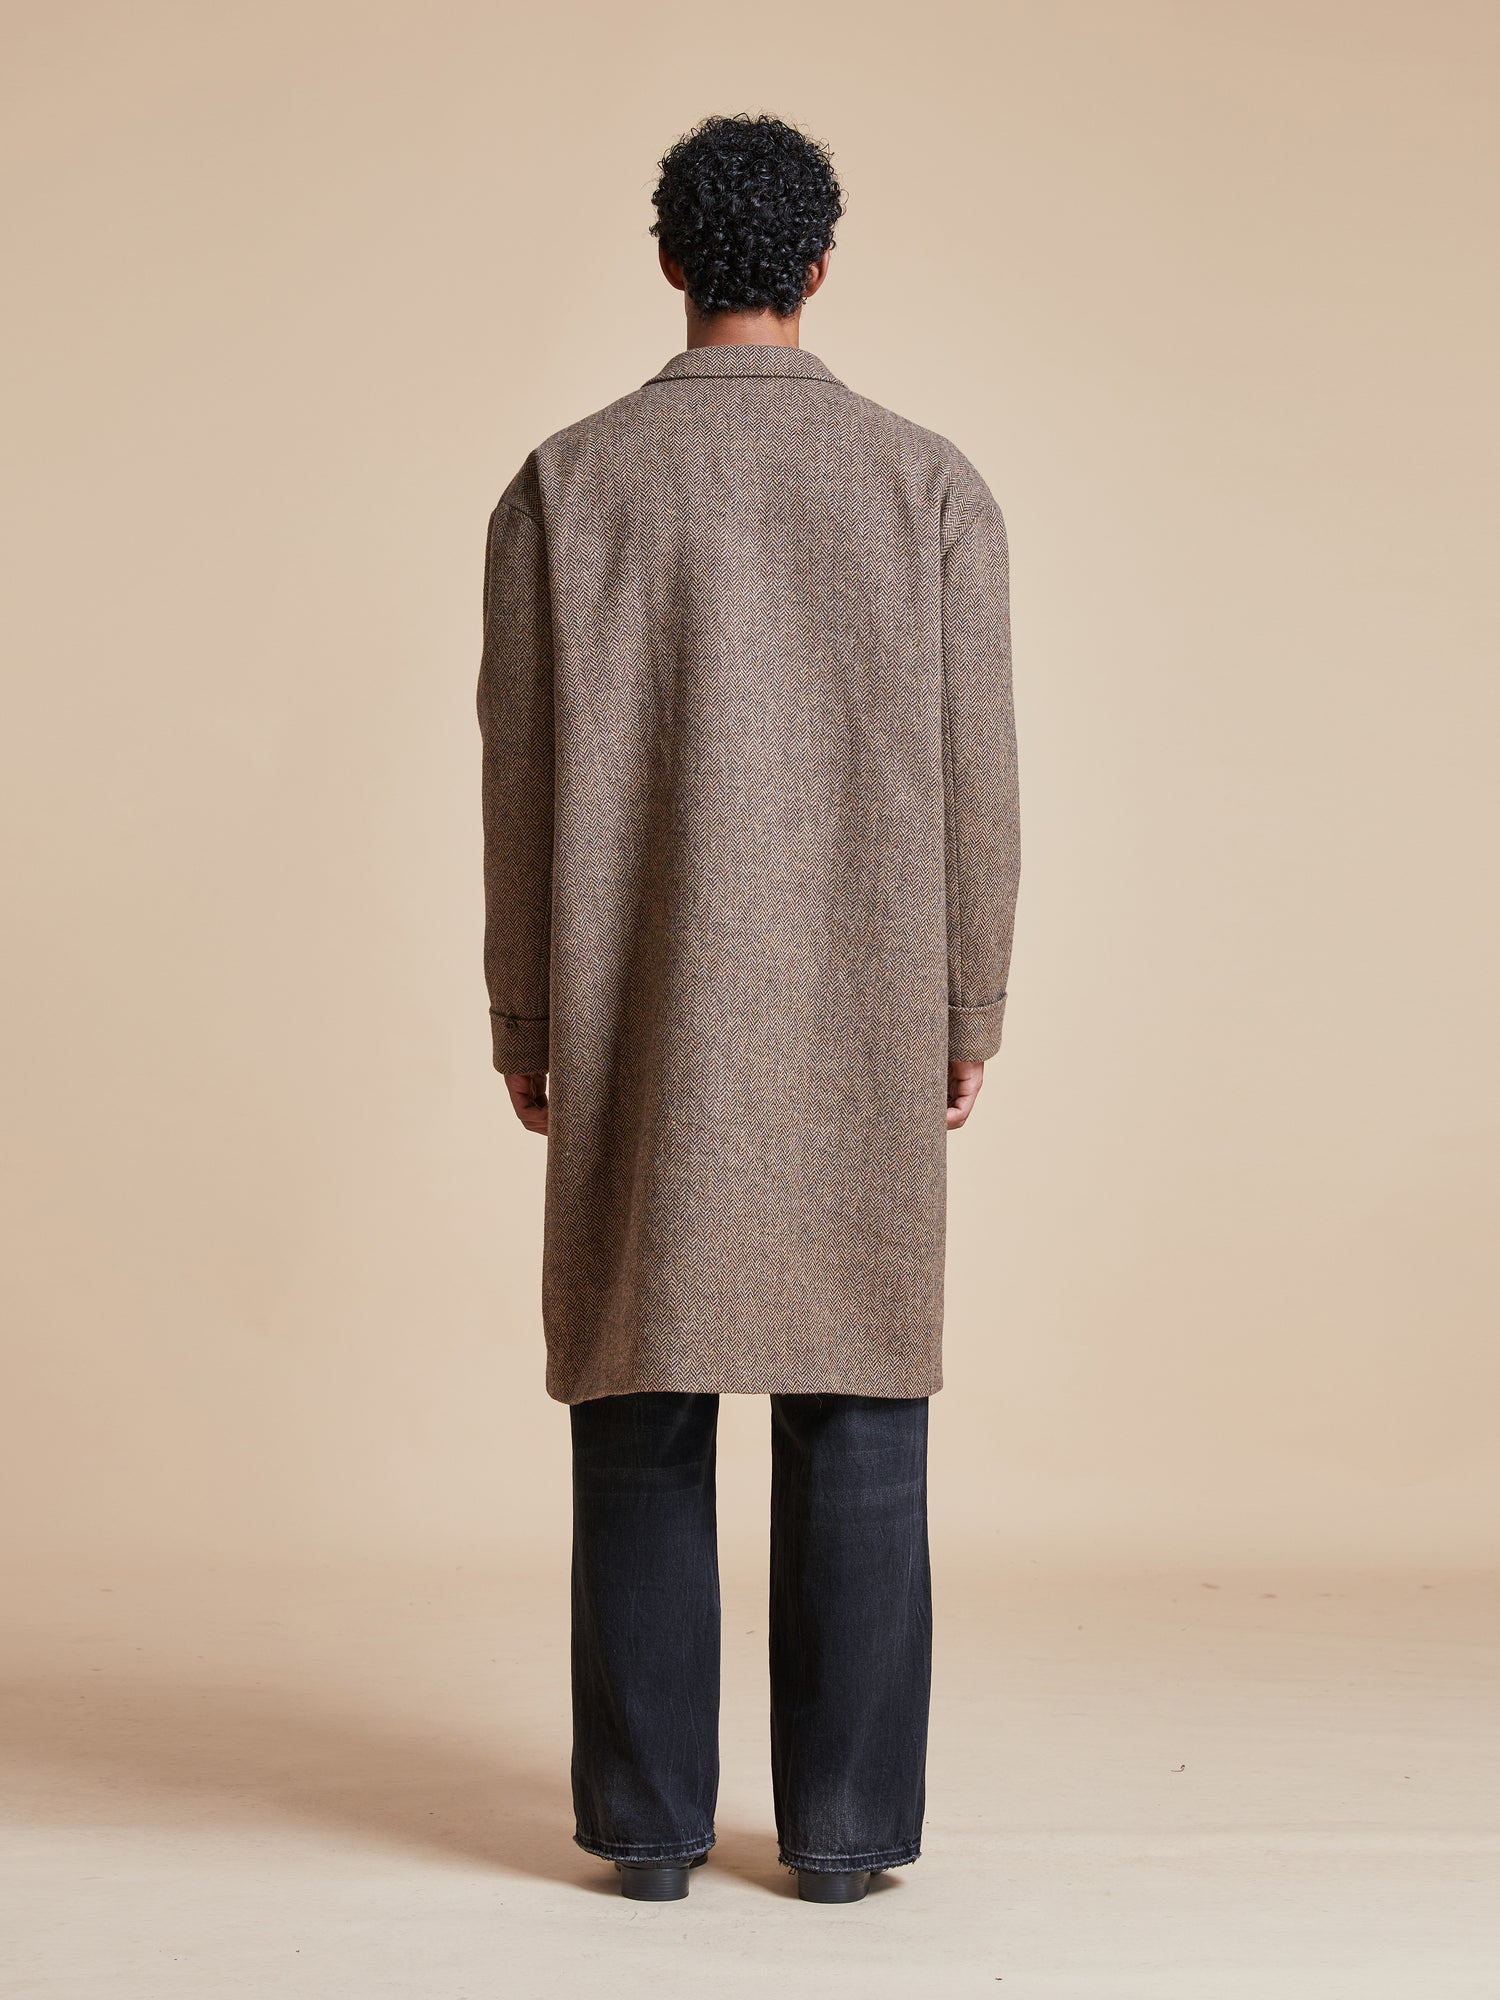 The back view of a man wearing a Found Elm Tweed Long Top Coat.